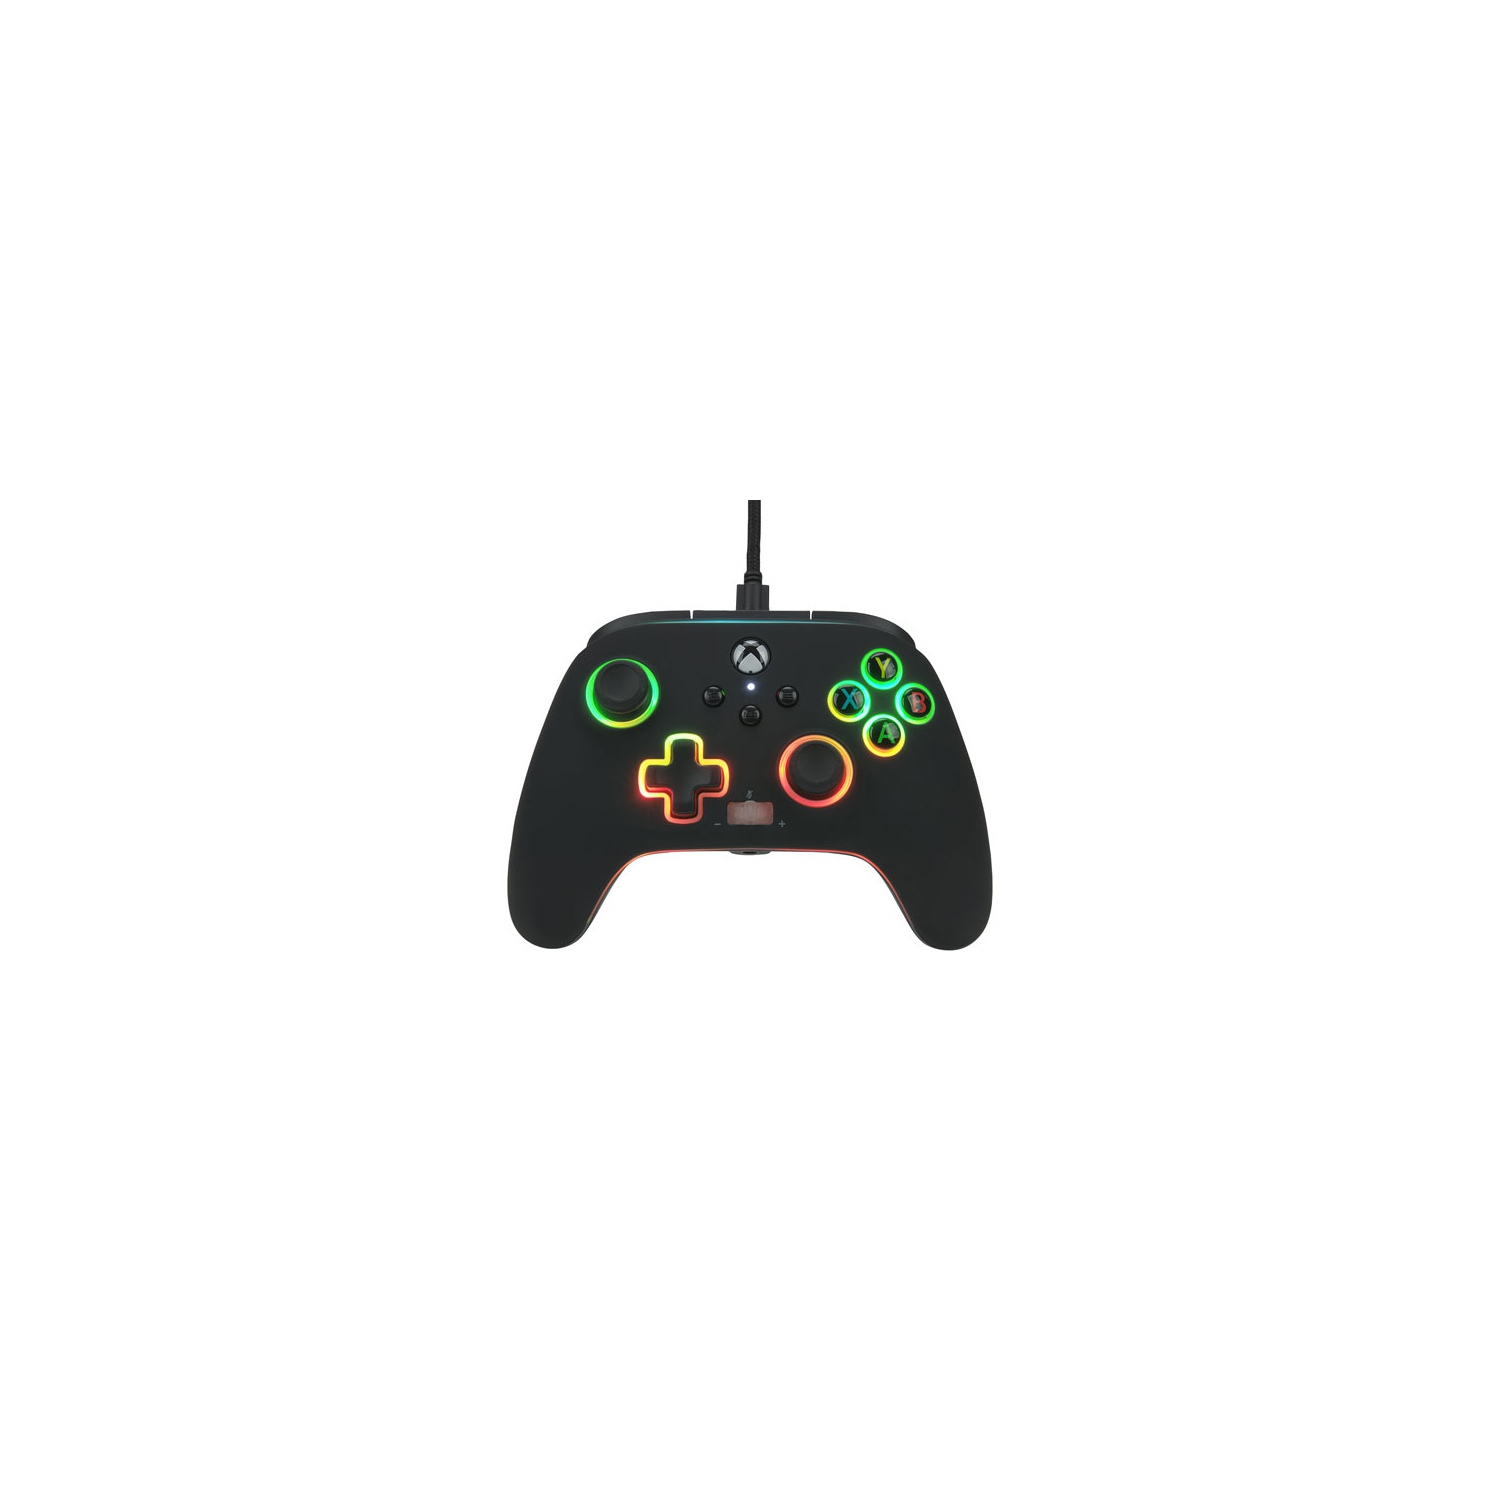 Refurbished (Excellent) - PowerA Spectra Infinity Enhanced Wired Controller for Xbox Series X|S - Black